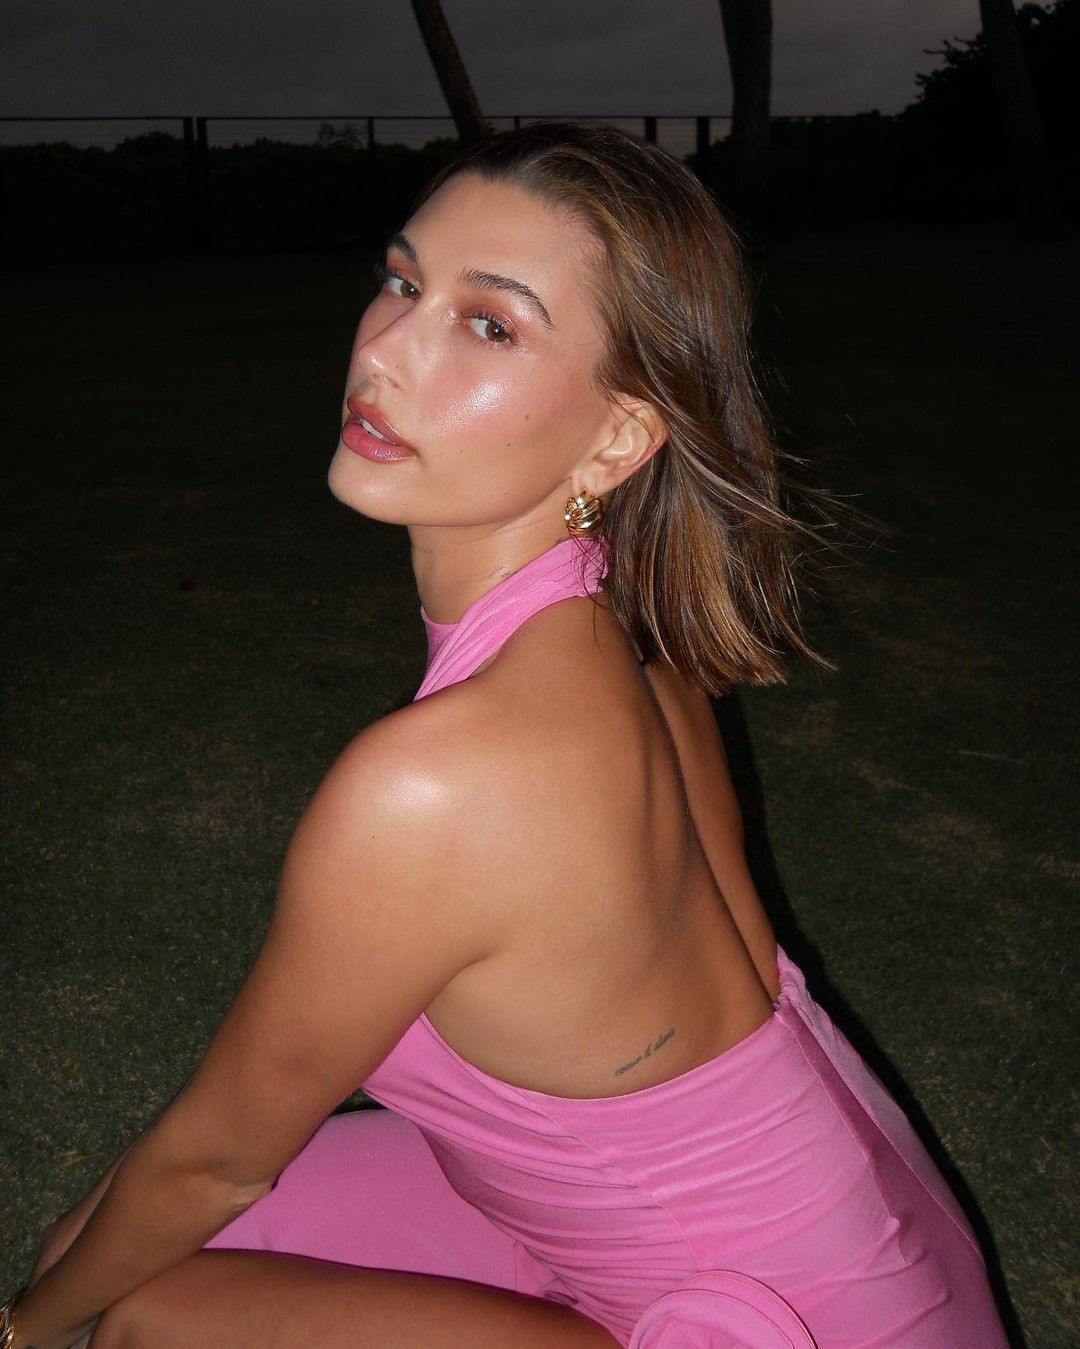 Hailey Bieber is Ready for Summer! - Photo 14